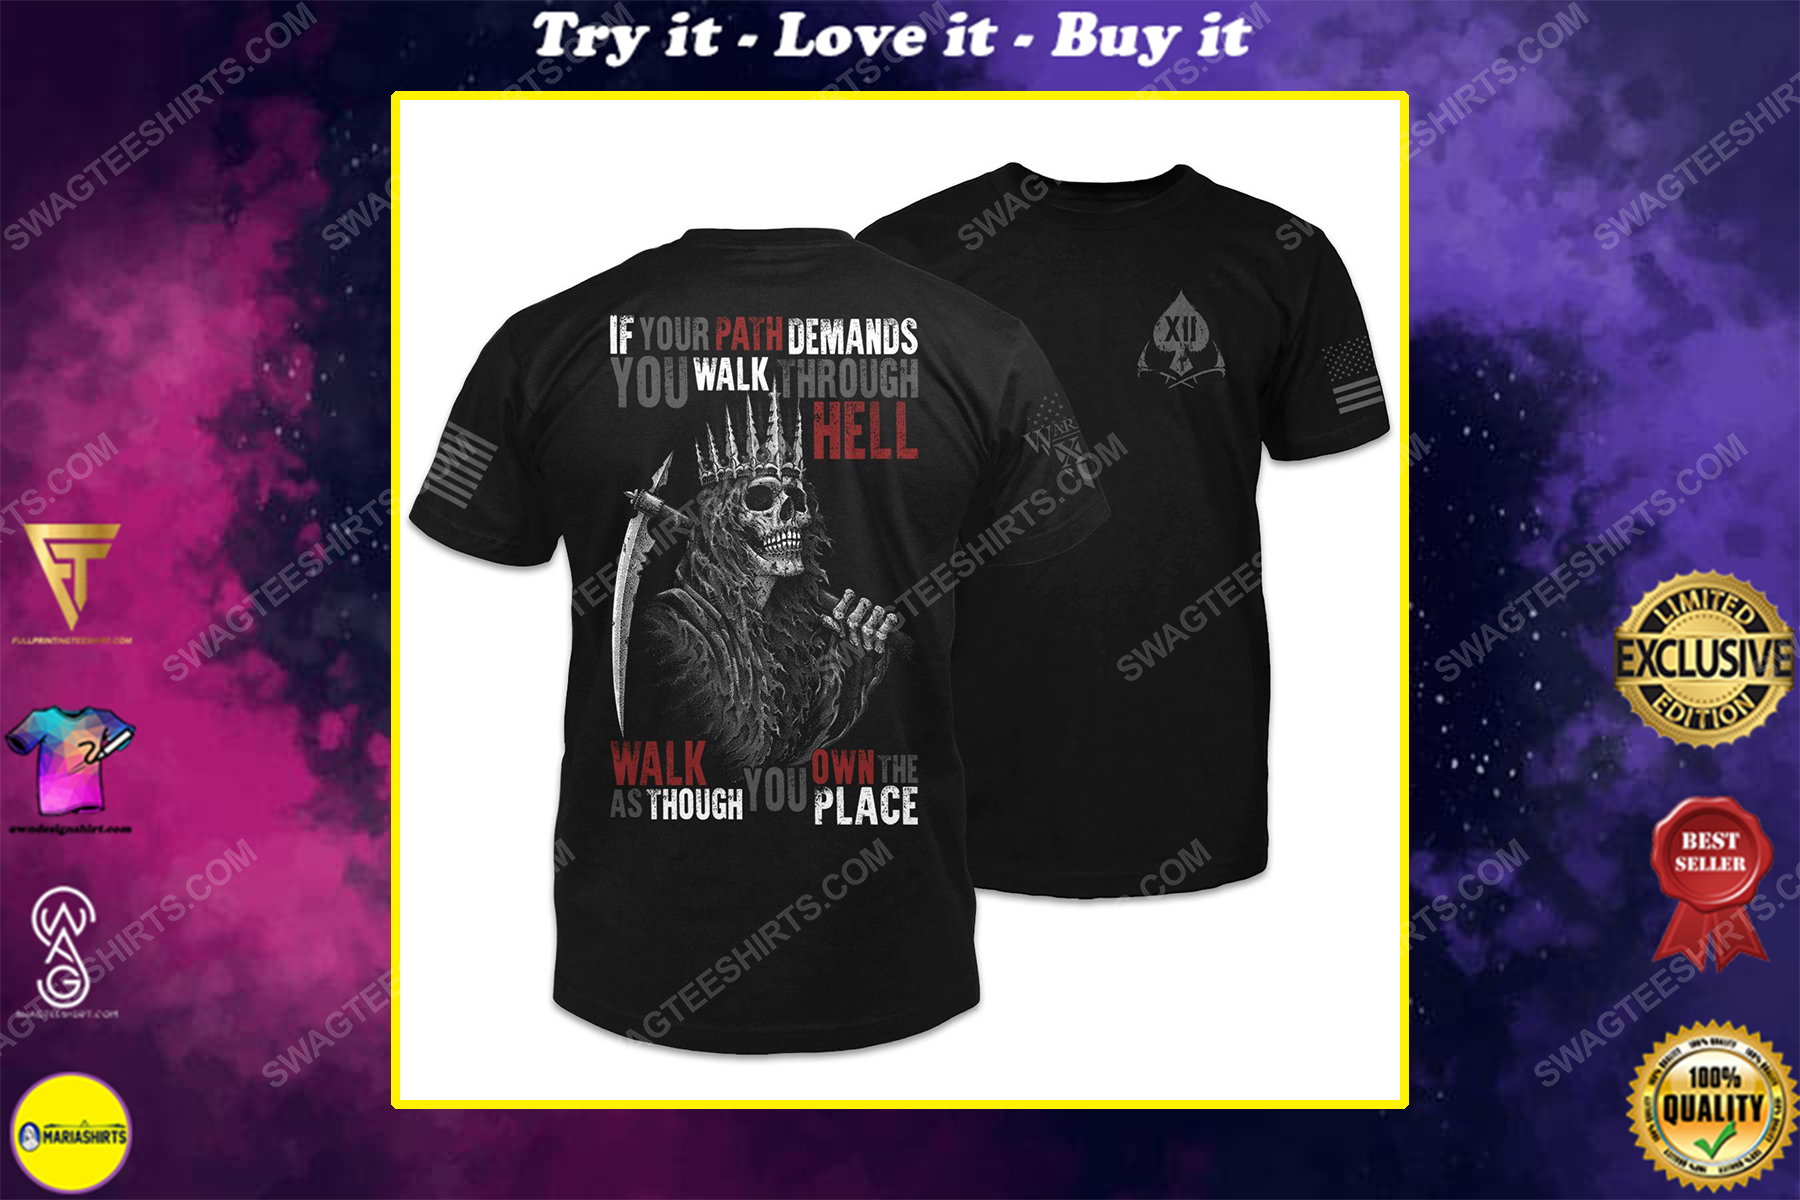 If your path demands you walk through hell walk as though you own the place skull shirt